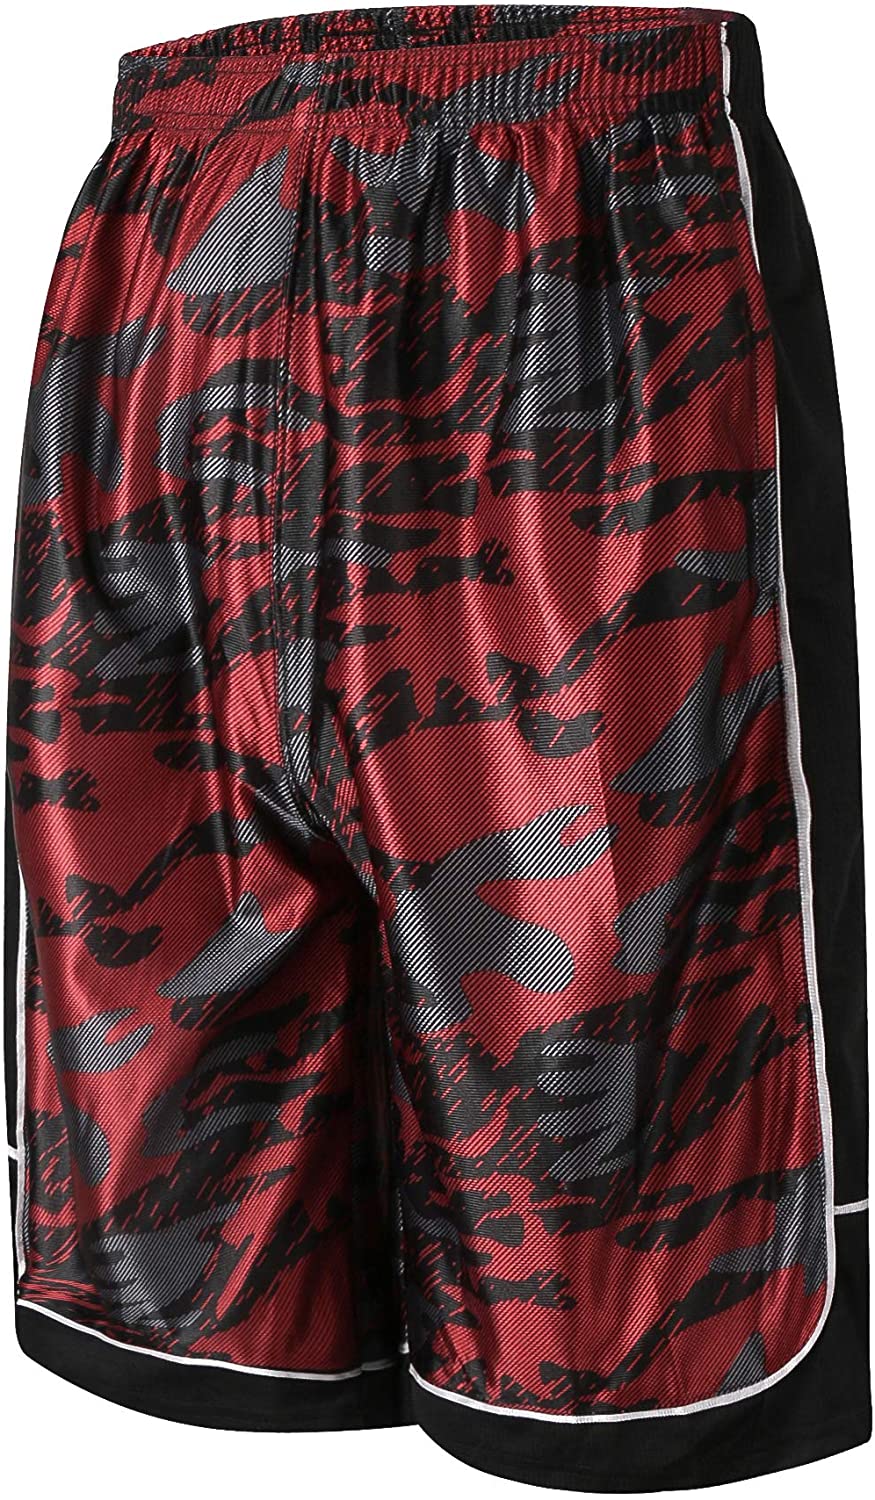 Abovewater Men's Basketball Shorts Quick-Dry Running & Gym Shorts with Drawstring & Pockets 